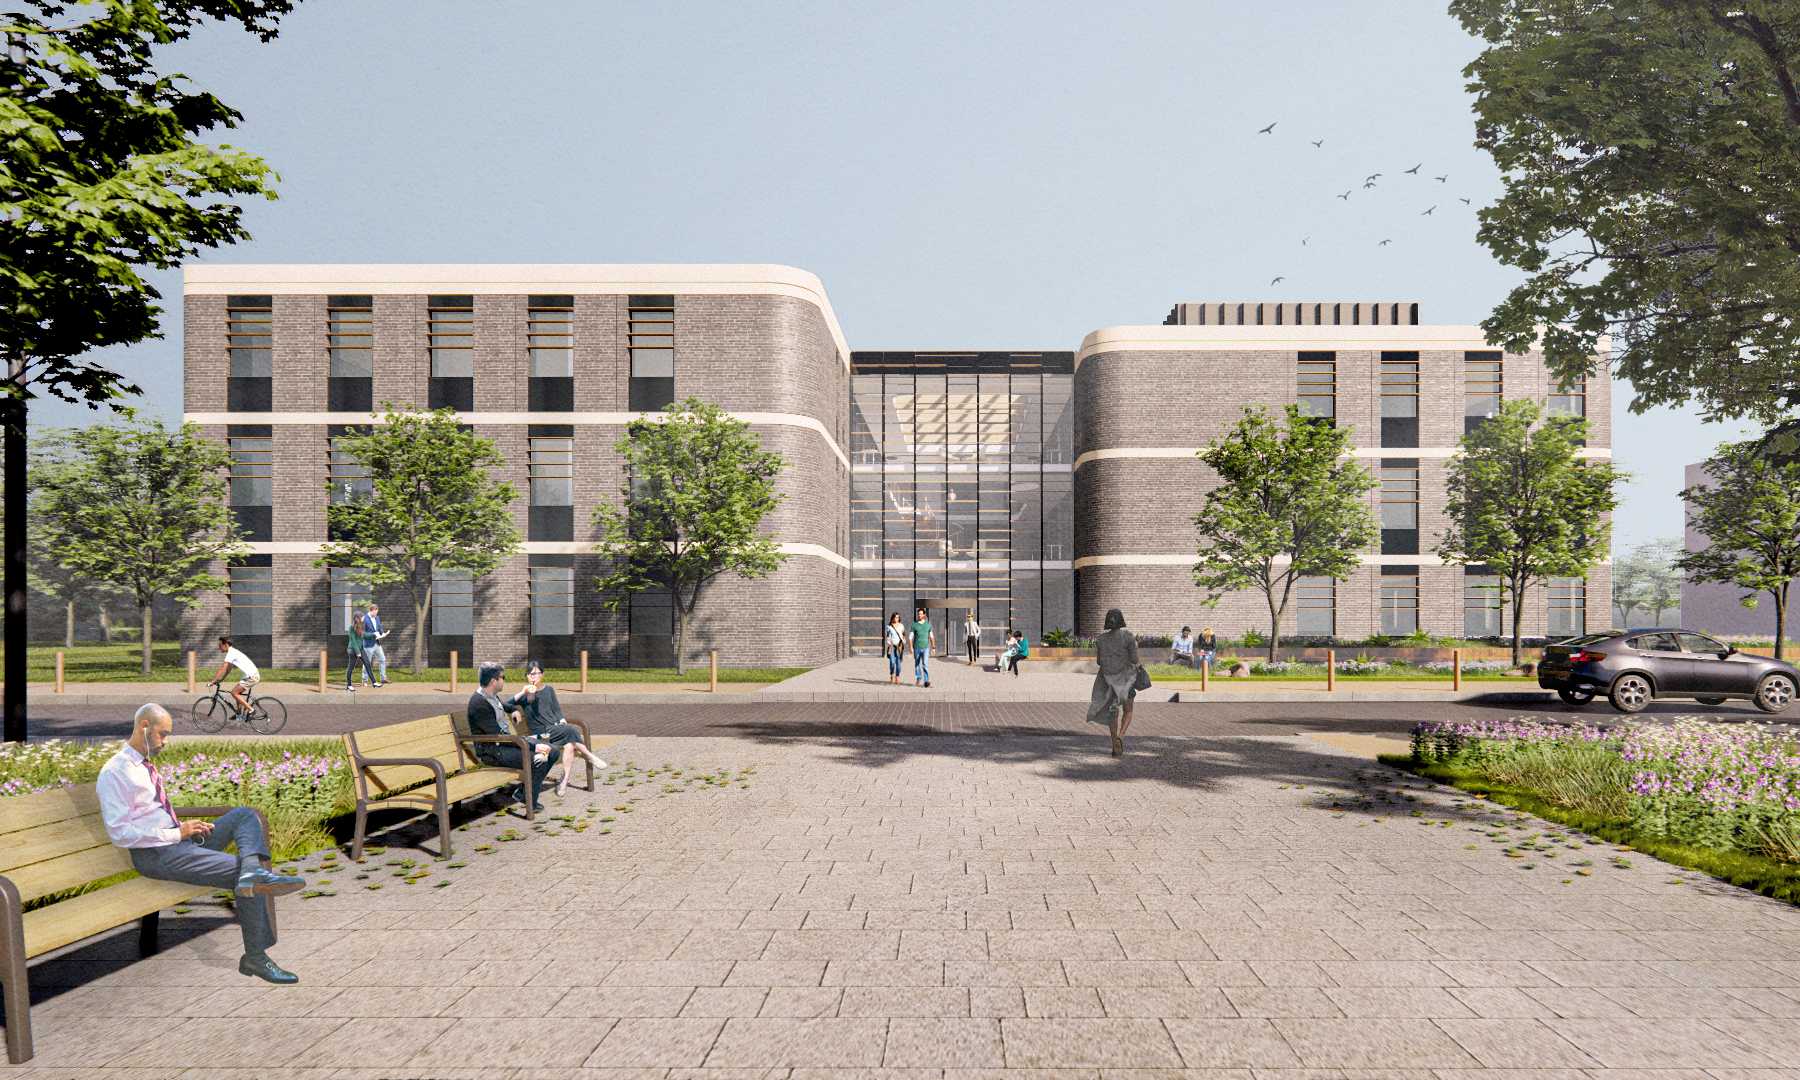 Works to start on site at Begbroke Science Park to deliver 135,000 Sqft of new research facilities for Oxford University